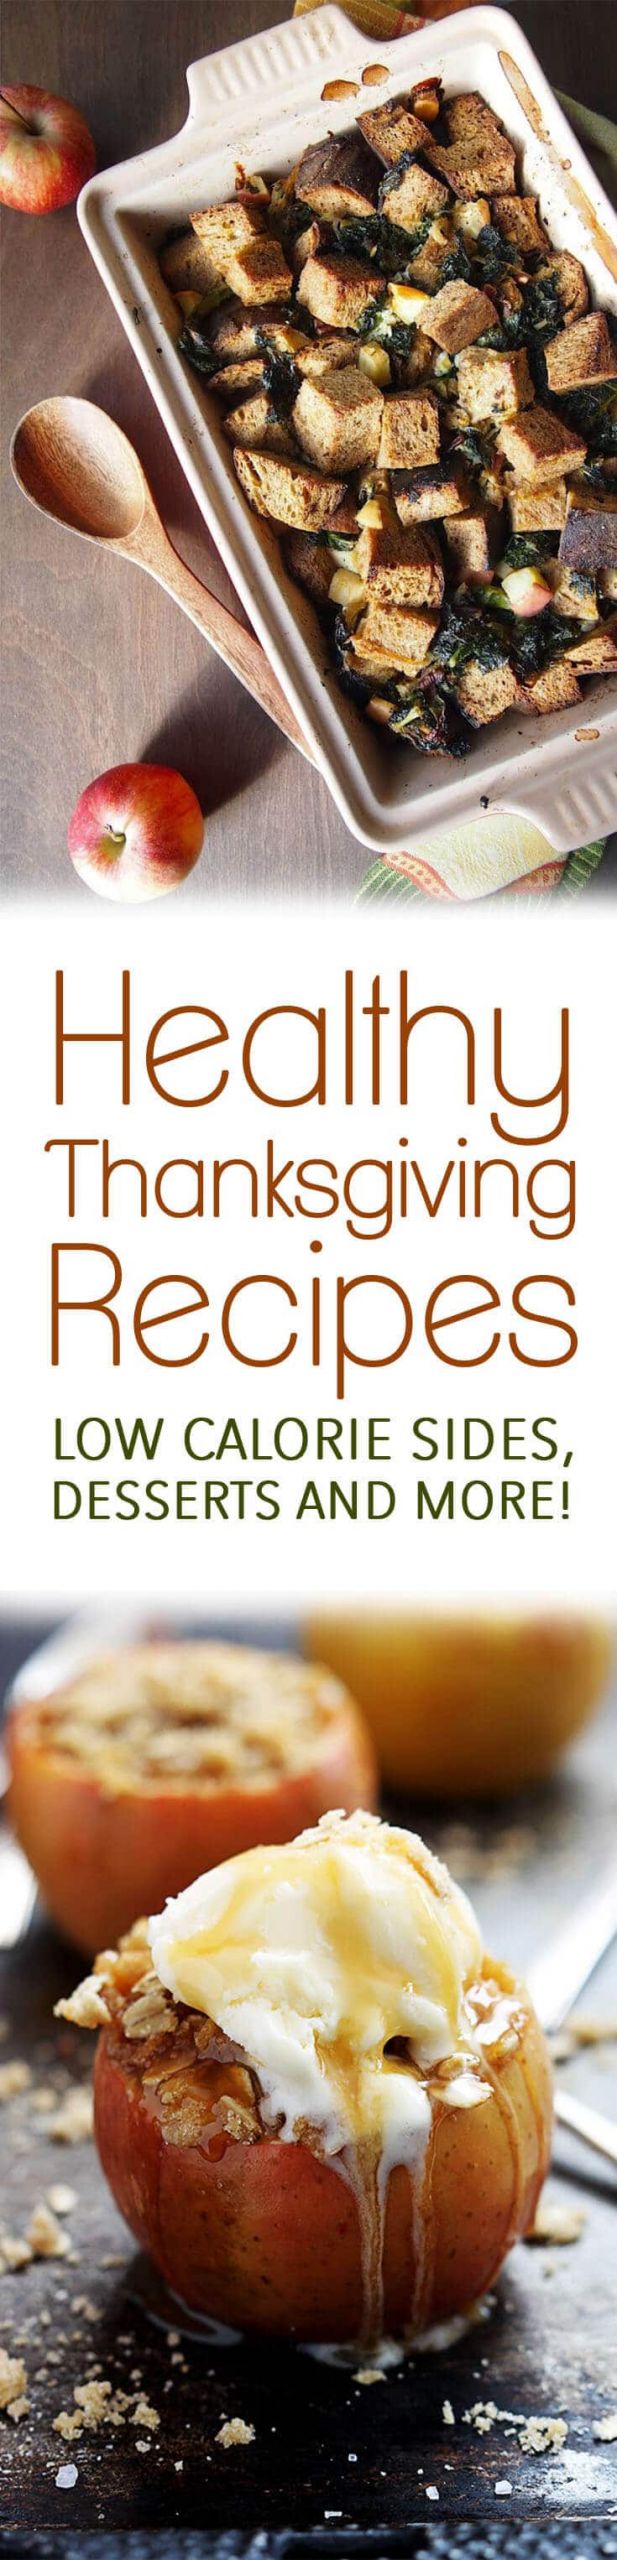 Low Calorie Thanksgiving Recipes
 10 Best Healthy Thanksgiving Recipes for Low Calorie Sides